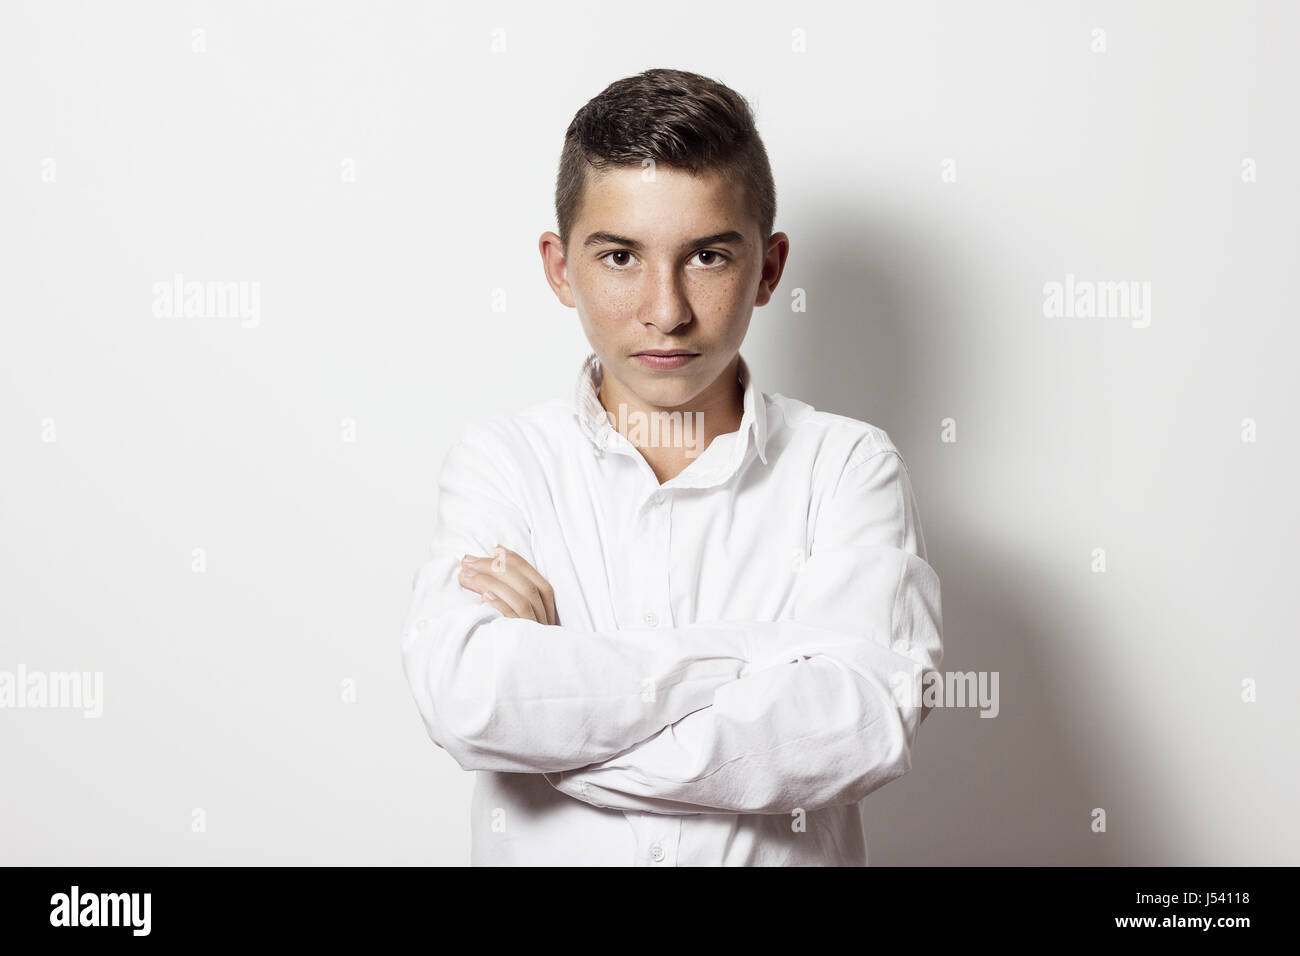 serious cute boy with crossed arms in front of white background Stock Photo